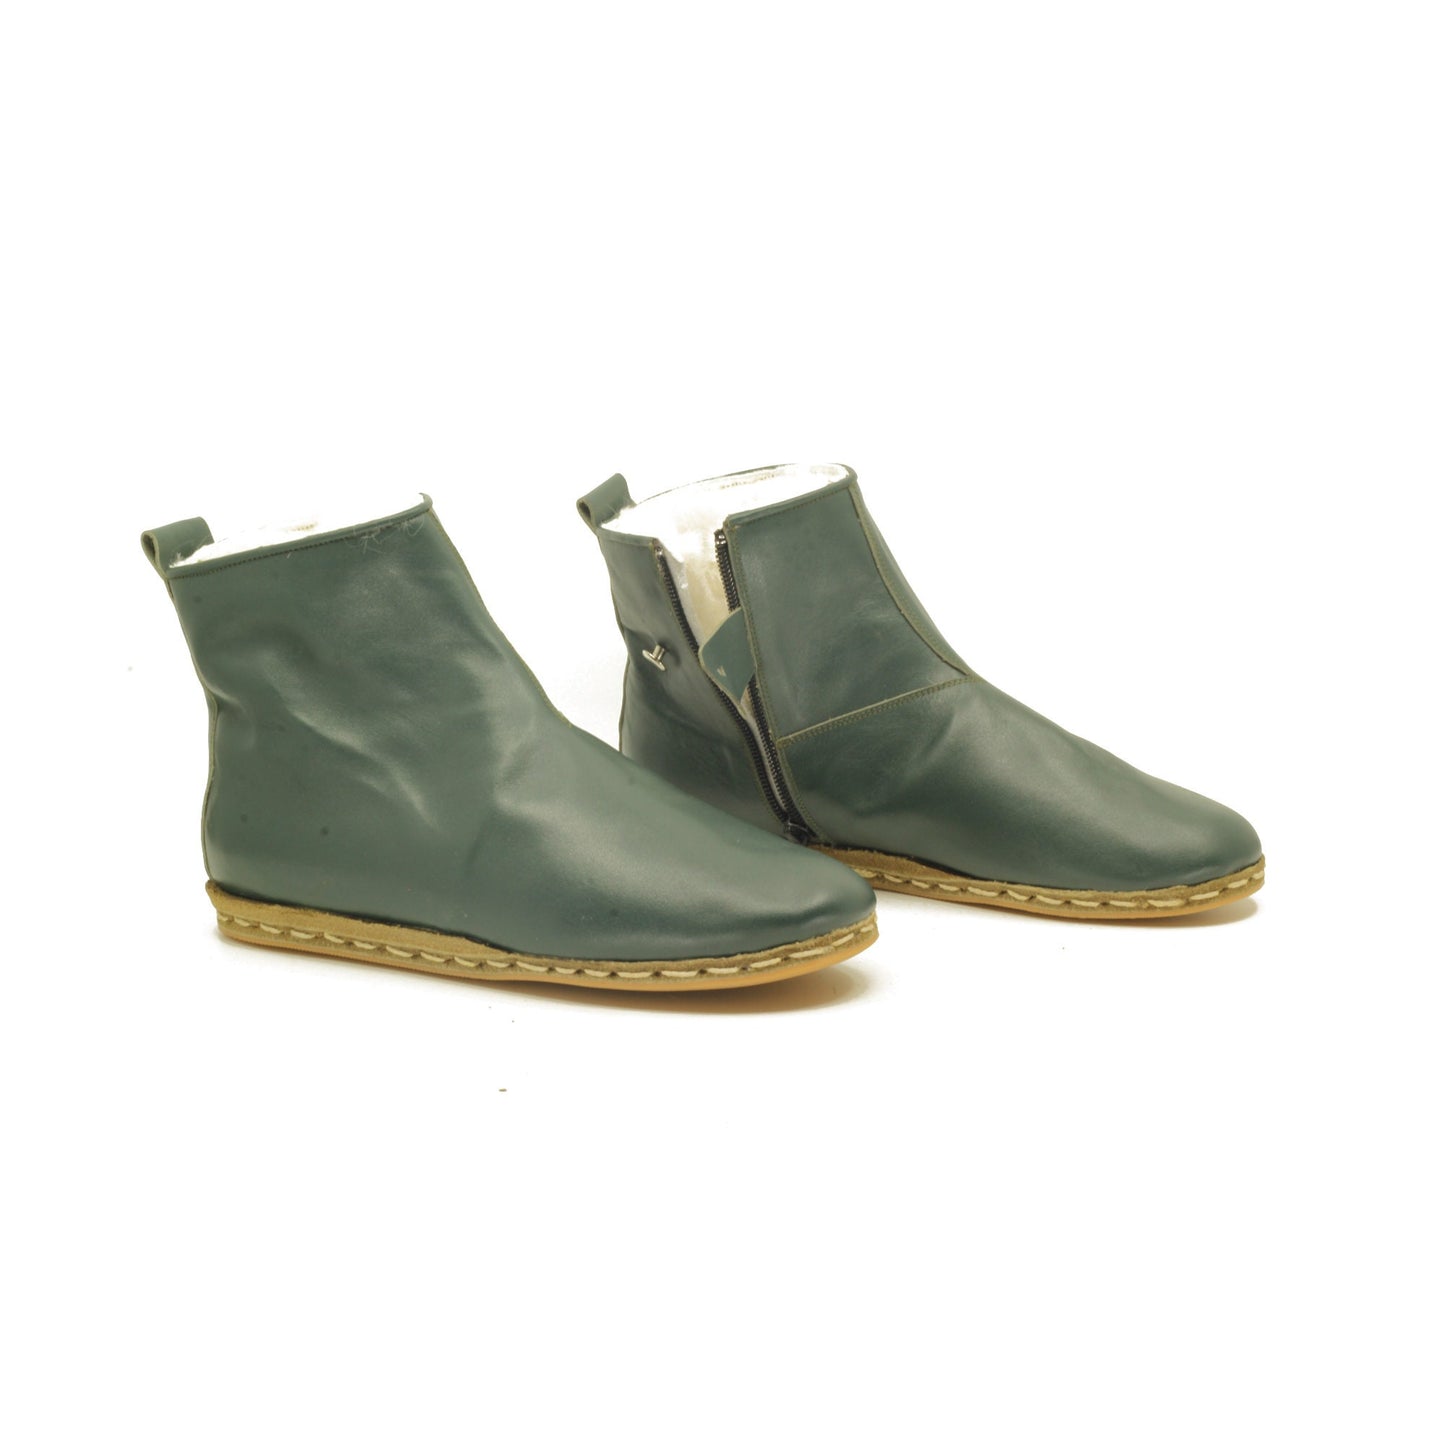 Women's Boot, Real Tuscan Fur Inside, All Leather, Shine Green